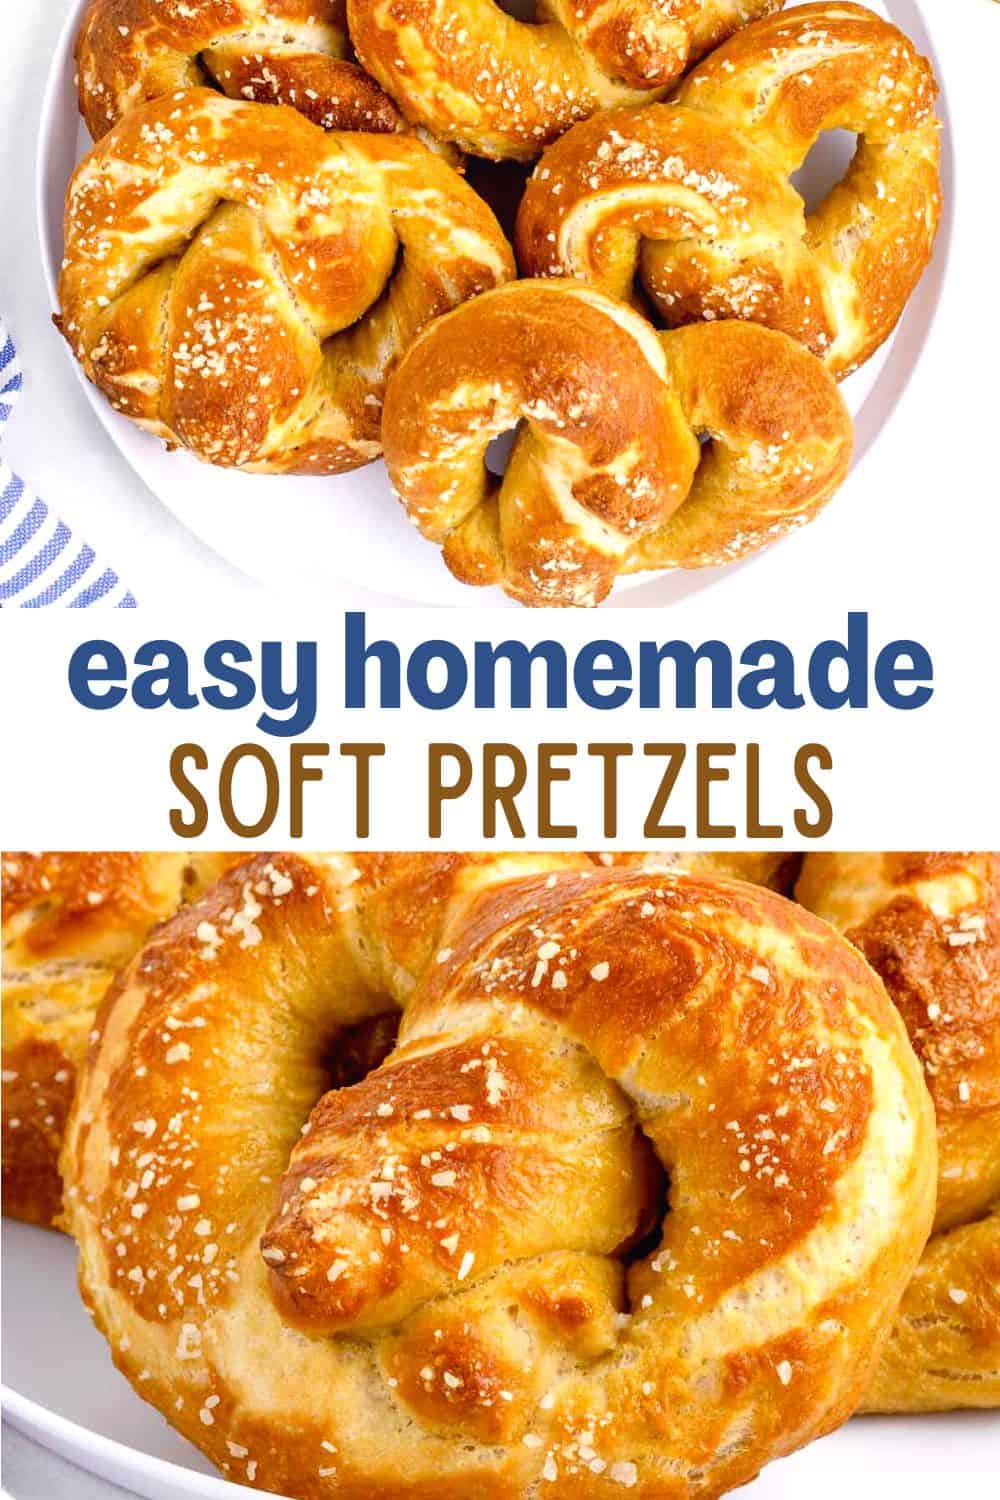 My favorite homemade soft pretzels recipe makes buttery and soft knots that rival any mall pretzels! You can also use this recipe to make pretzel bites, buns, bread or rolls.